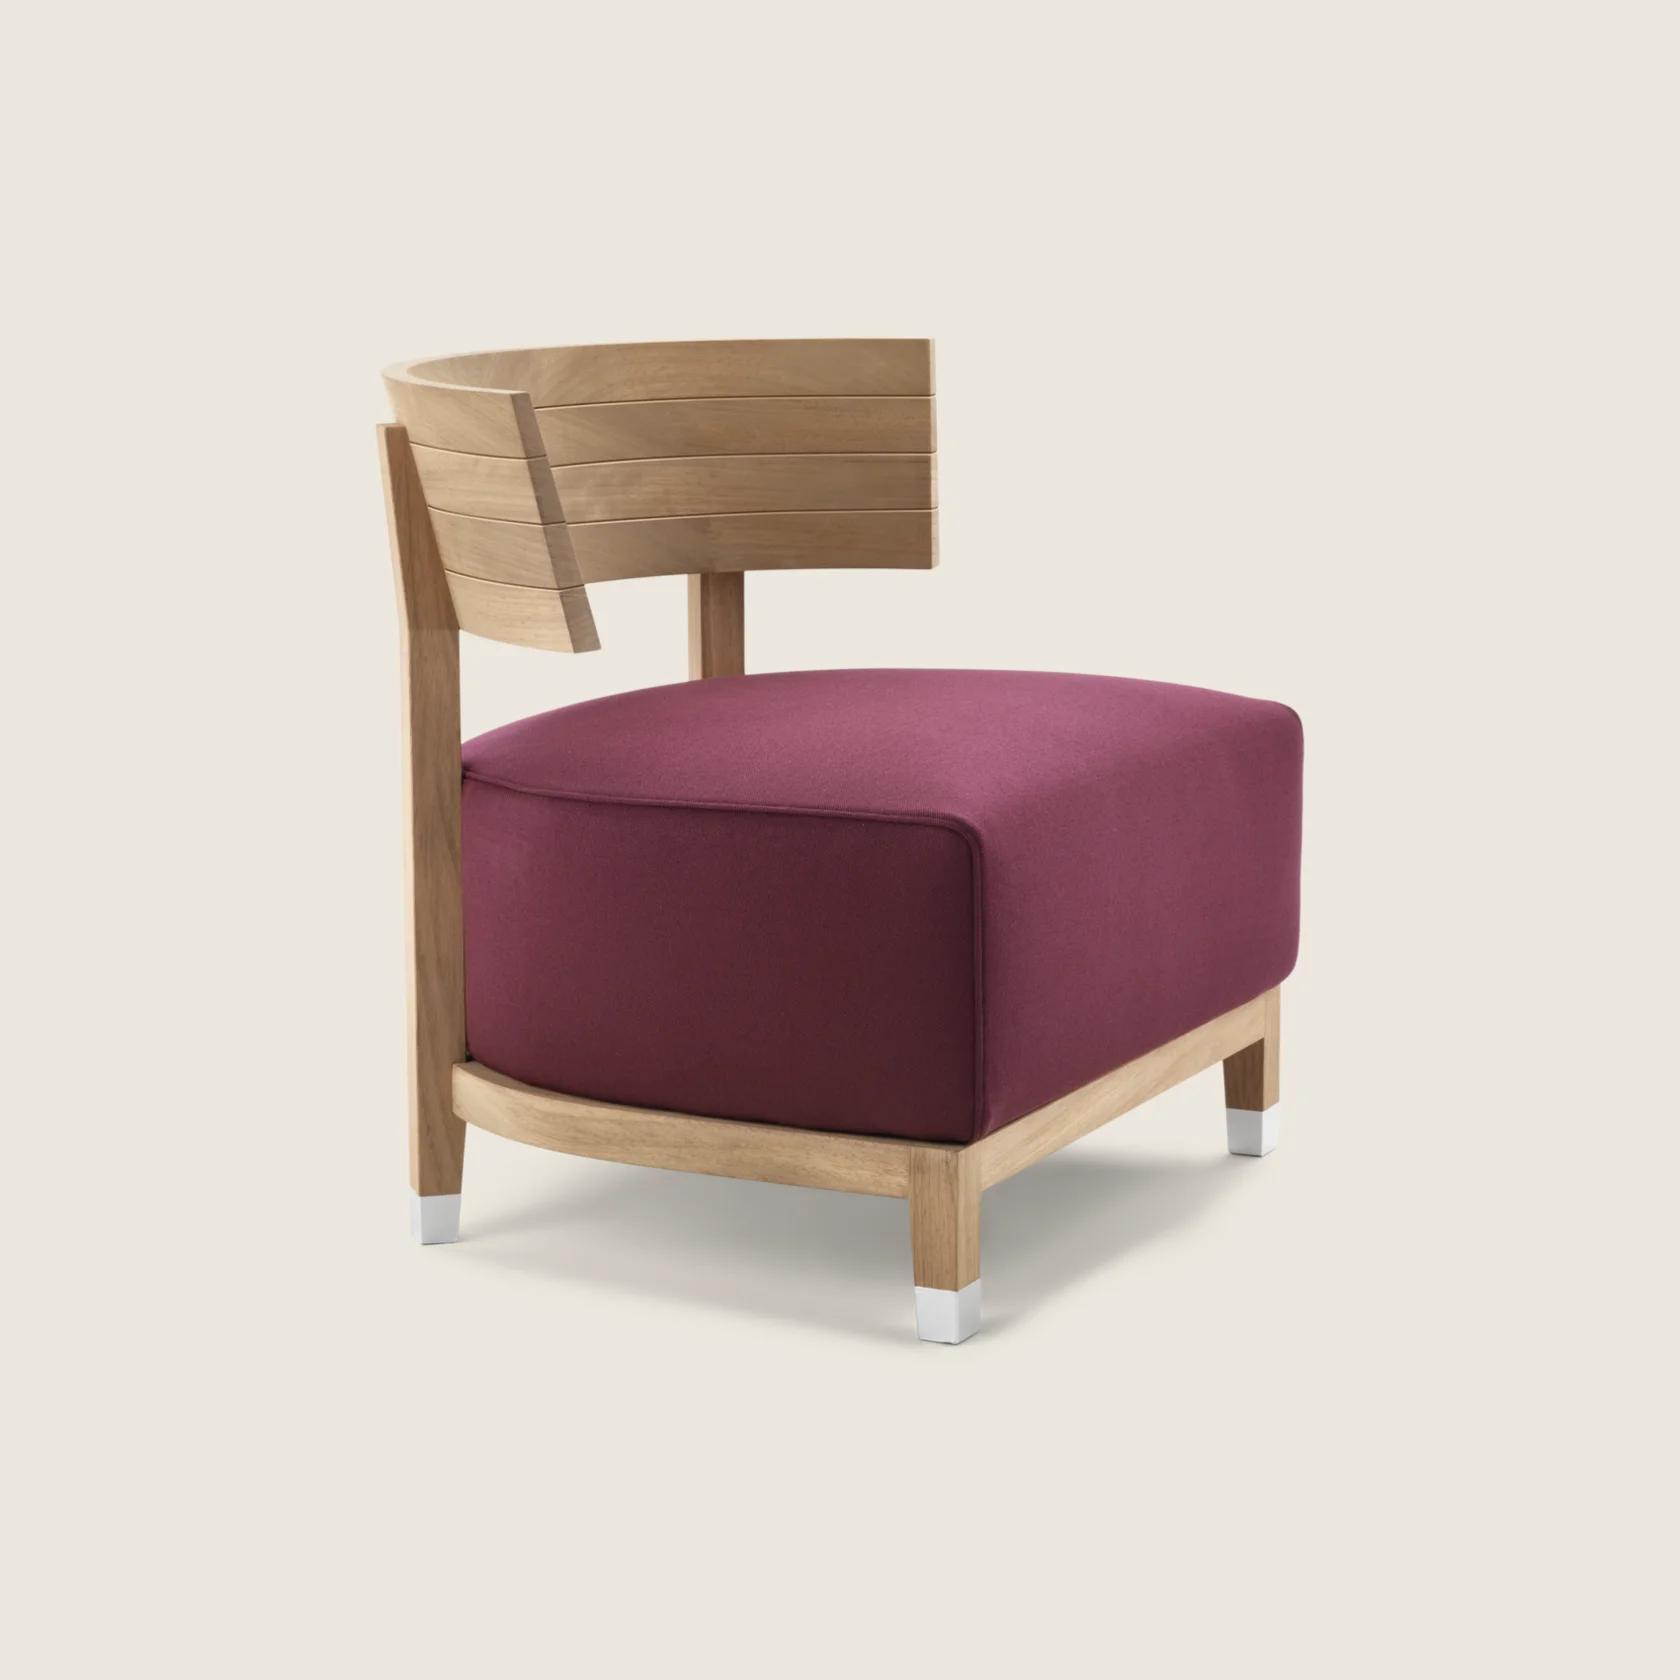 011NA1_THOMAS OUTDOOR_ARMCHAIR_01.png